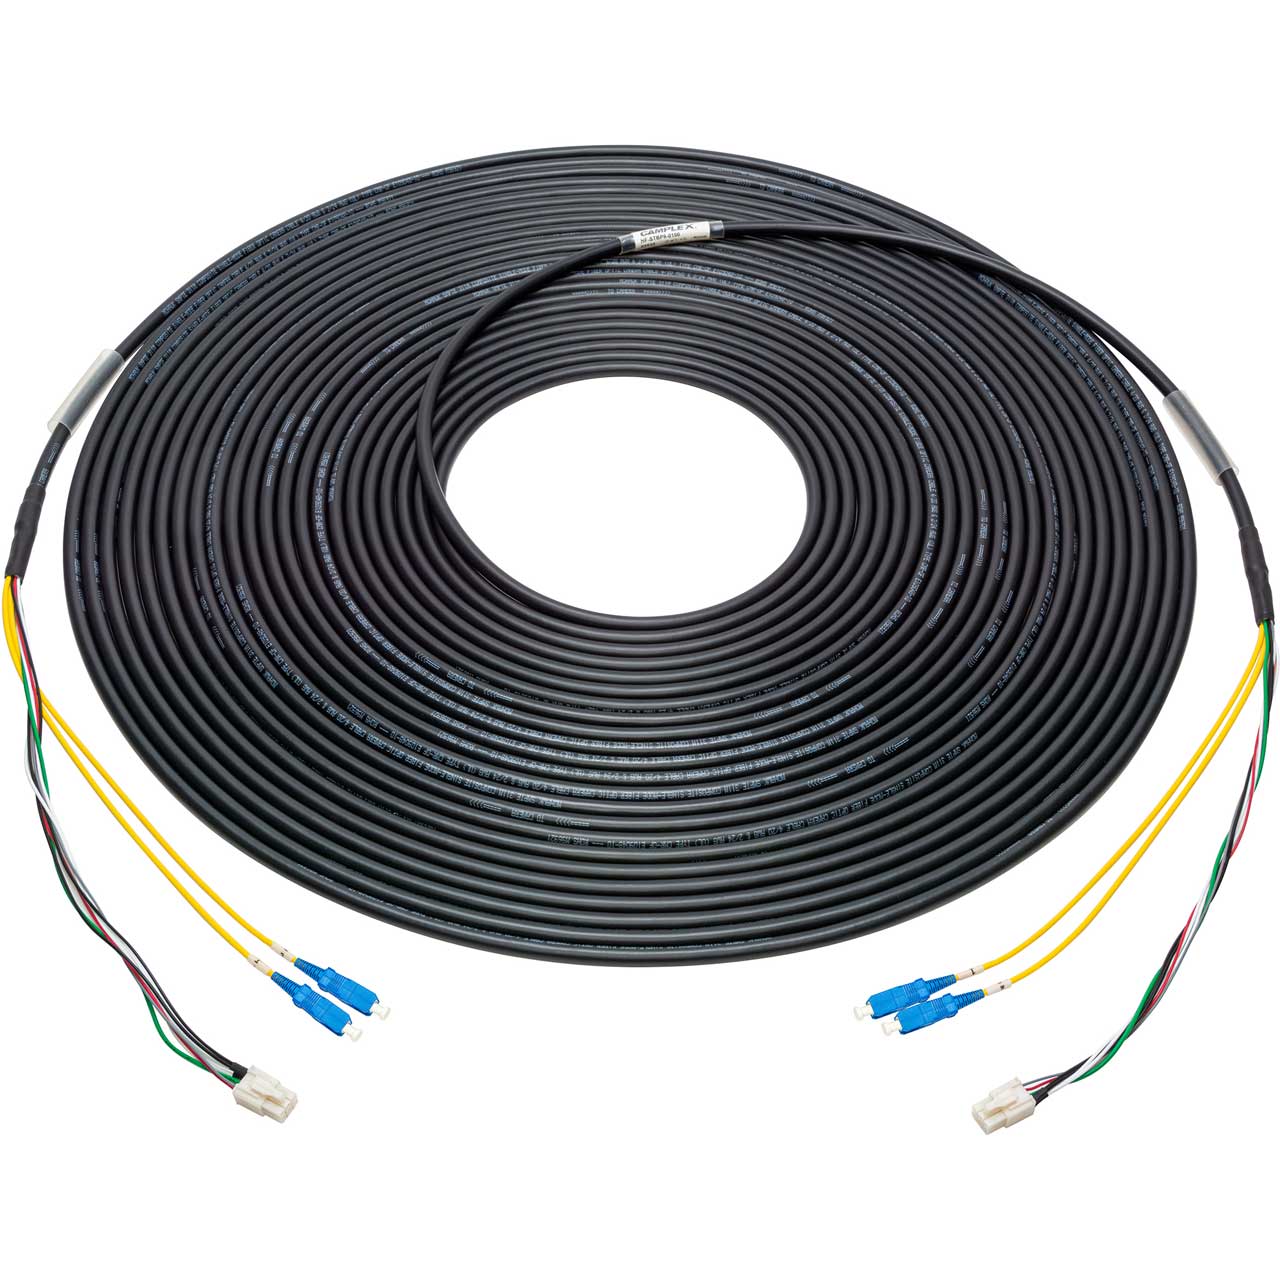 Camplex HF-SCBP8-0500 SMPTE Cable with Dual SC Fiber and 6